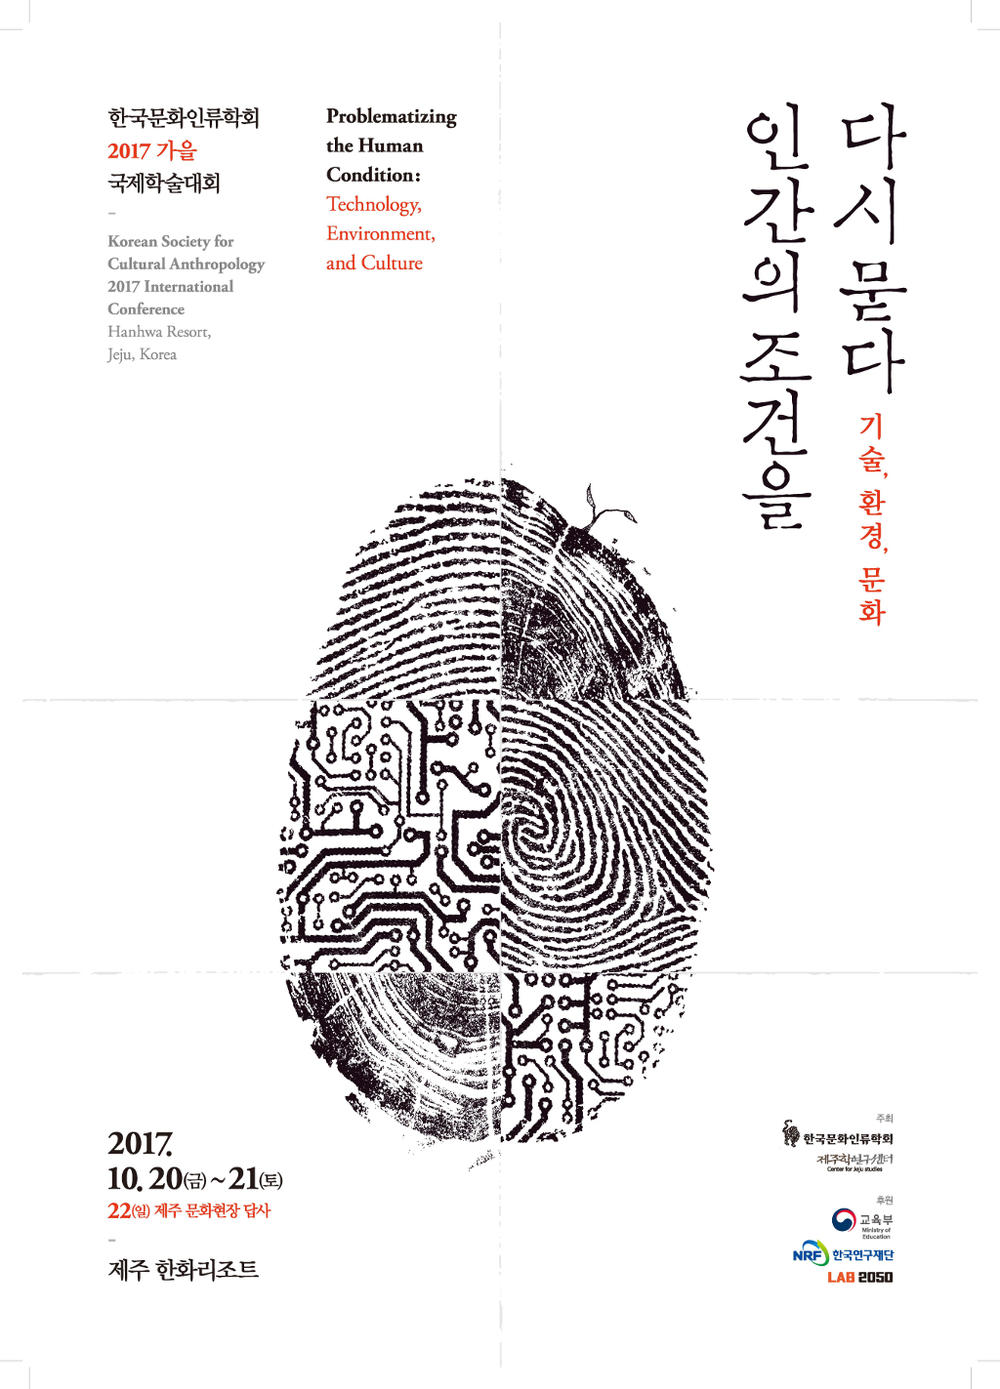 [Korean Soceity for Cultural Anthropology] 2017 Fall Conference